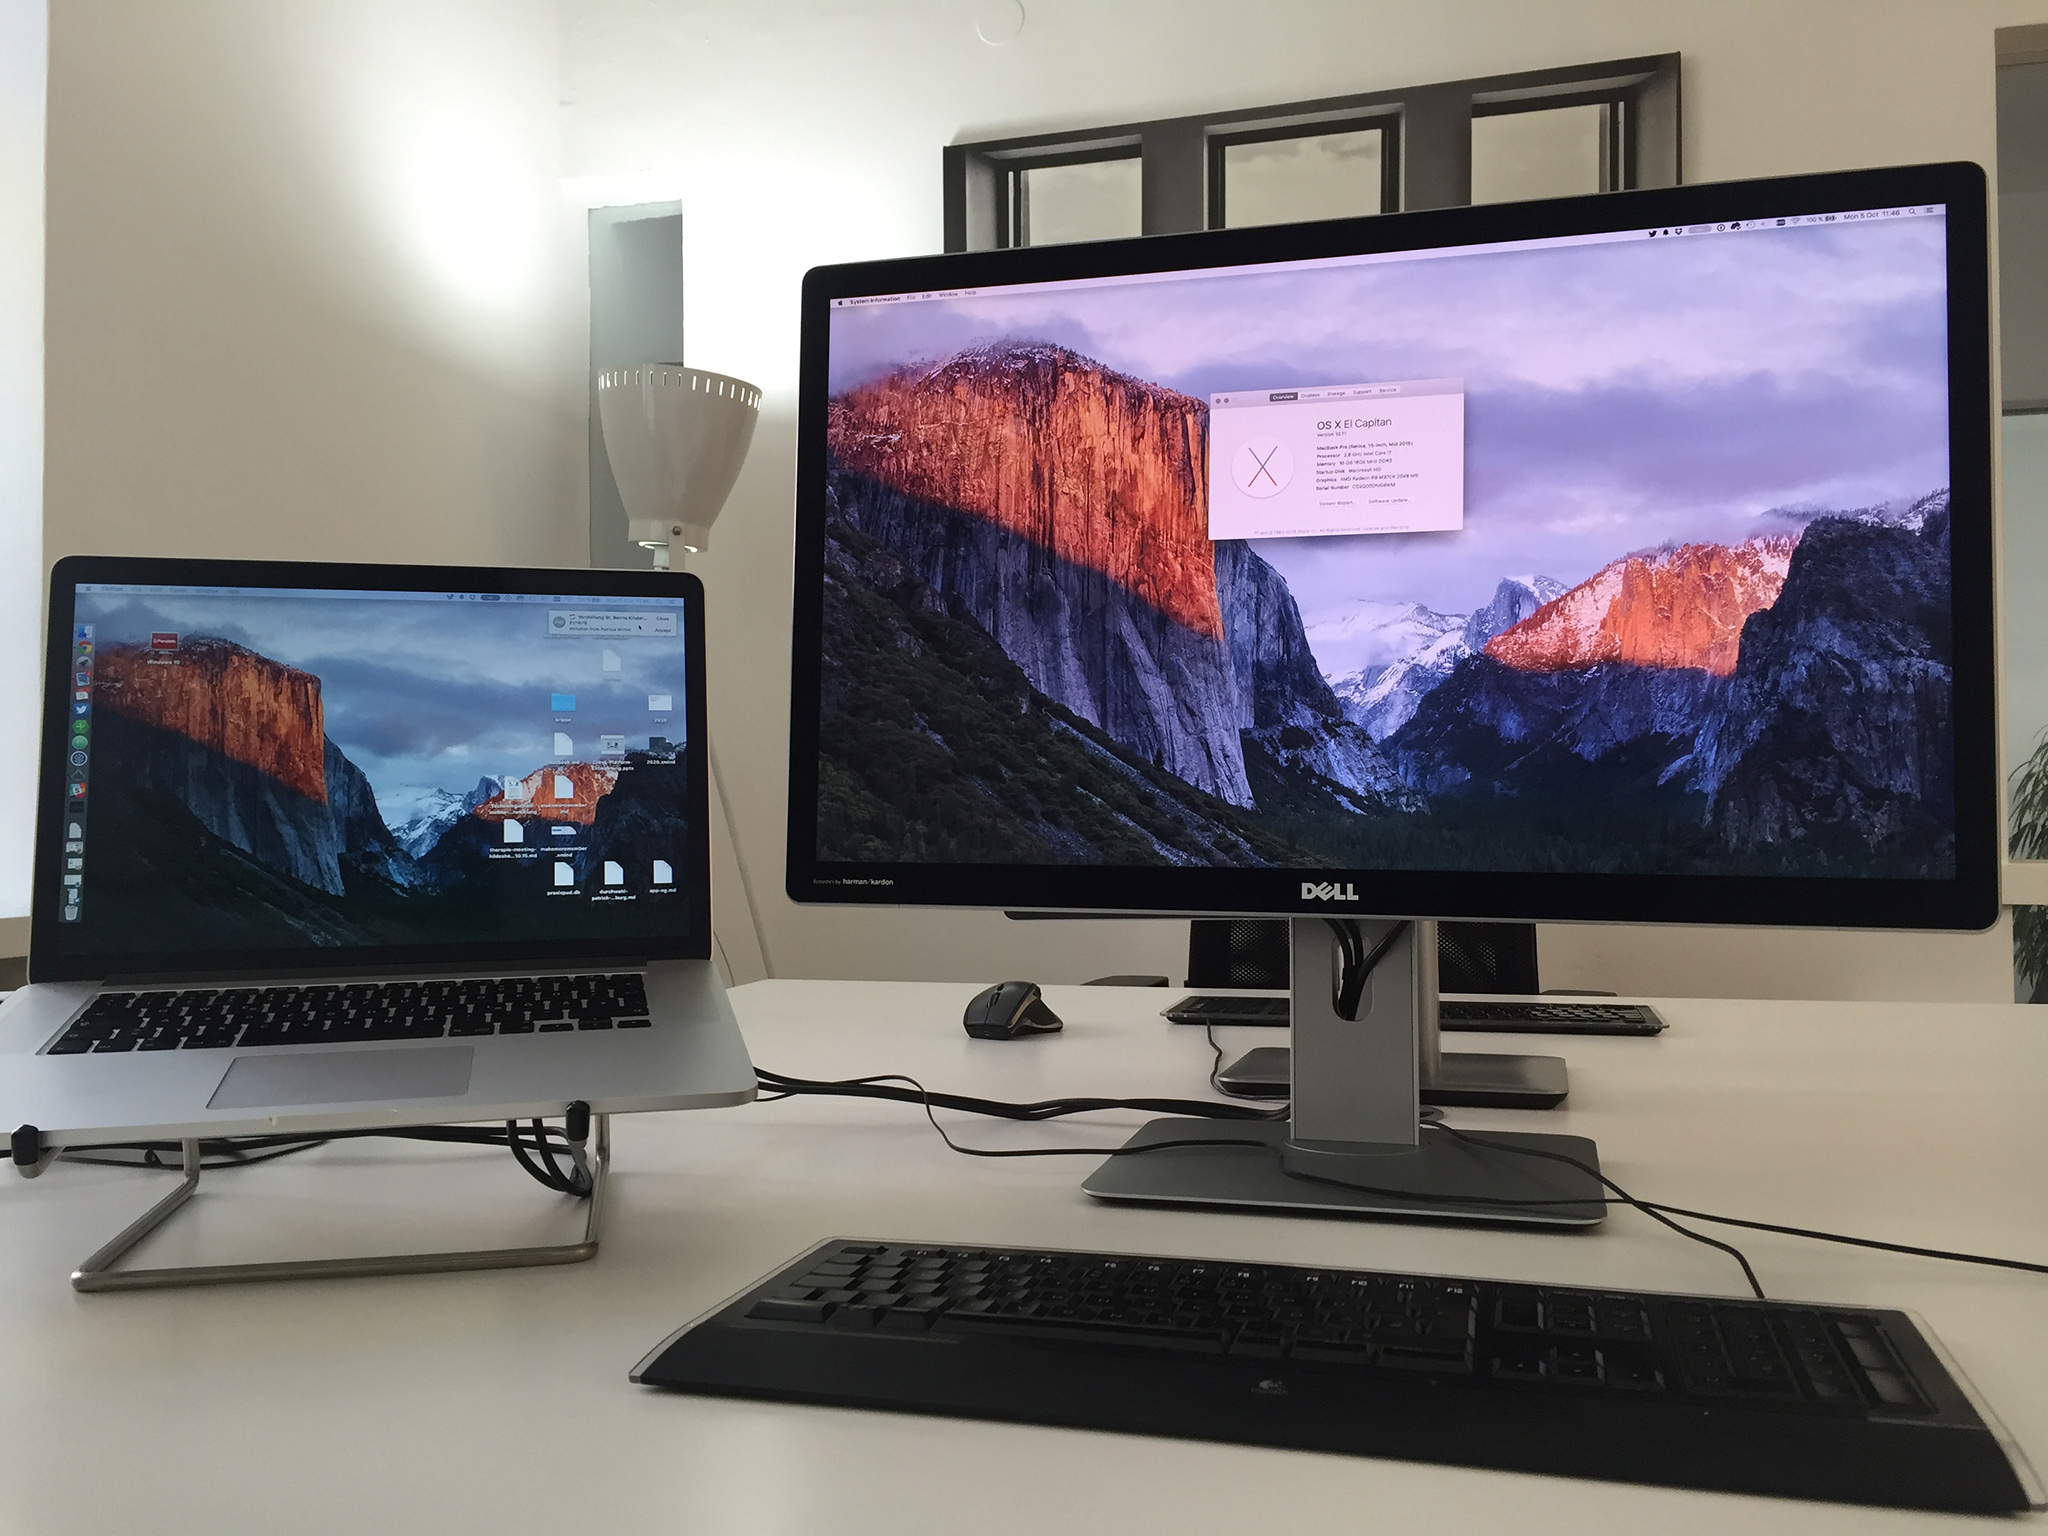 Dell UP2715K and MacBook Pro (Retina, 15-inch, Mid 2015) with an AMD Radeon R9 M370X